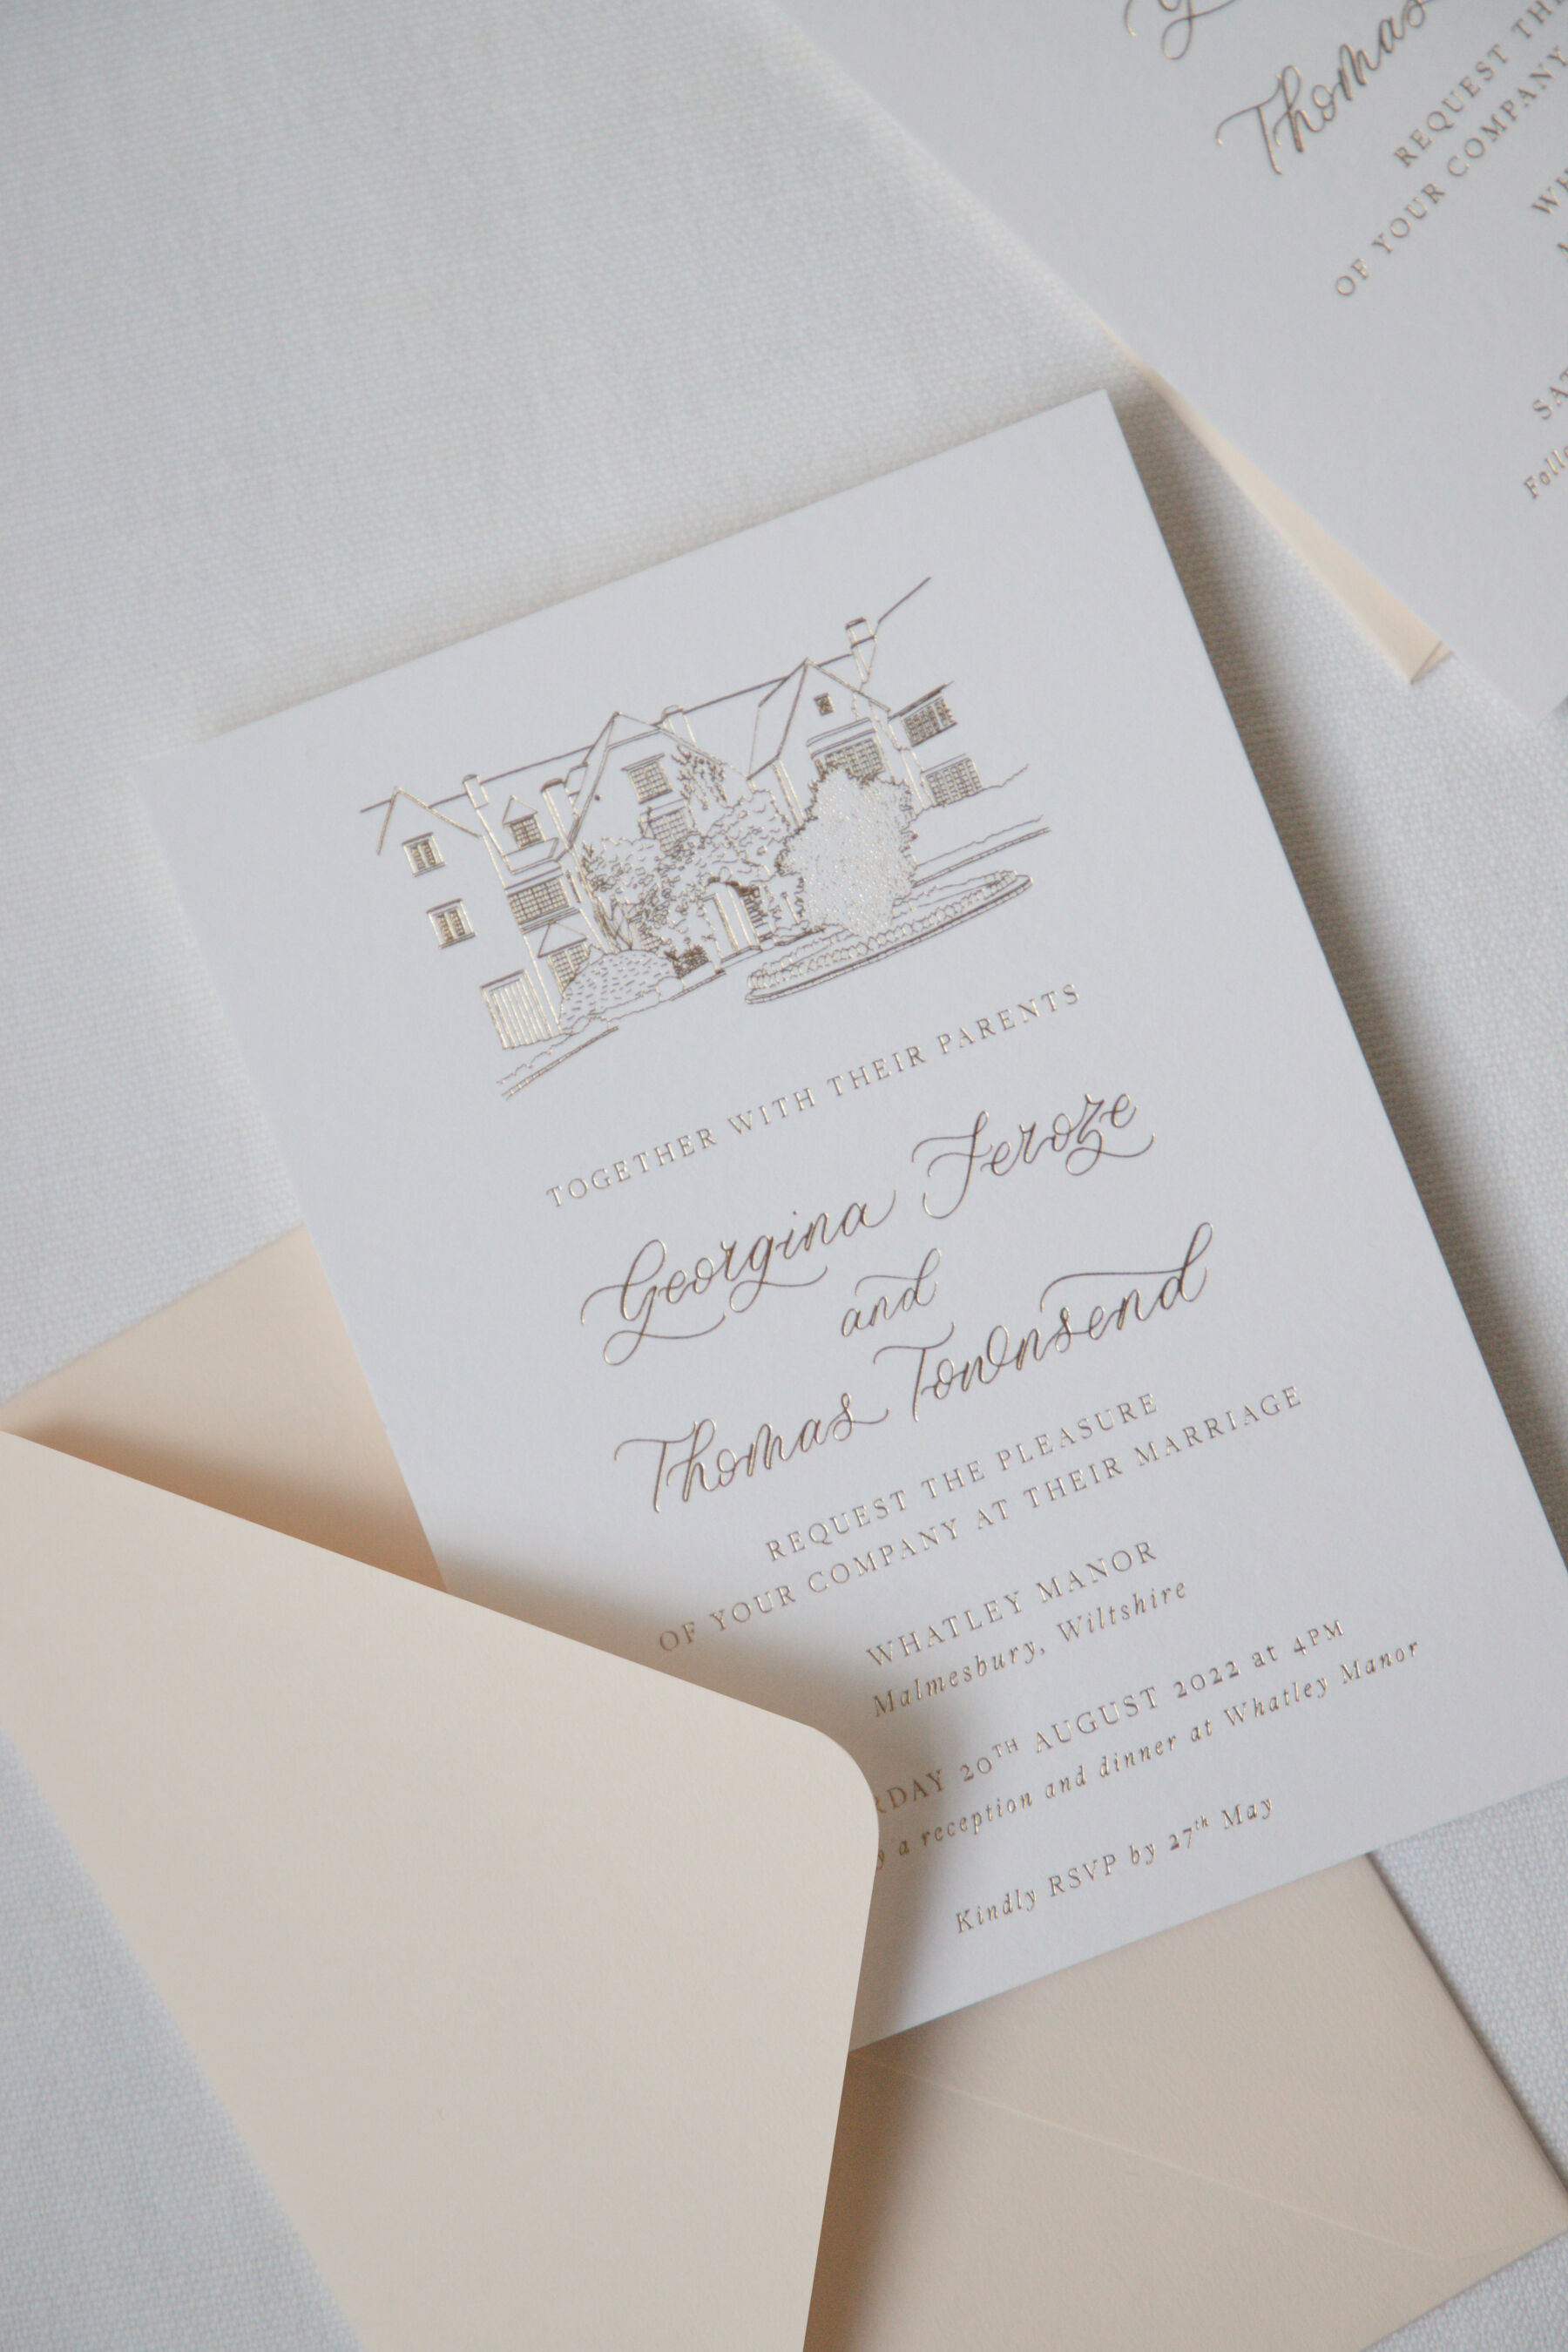 Bespoke hot foil printed wedding invitation with venue illustration and calligraphy details.